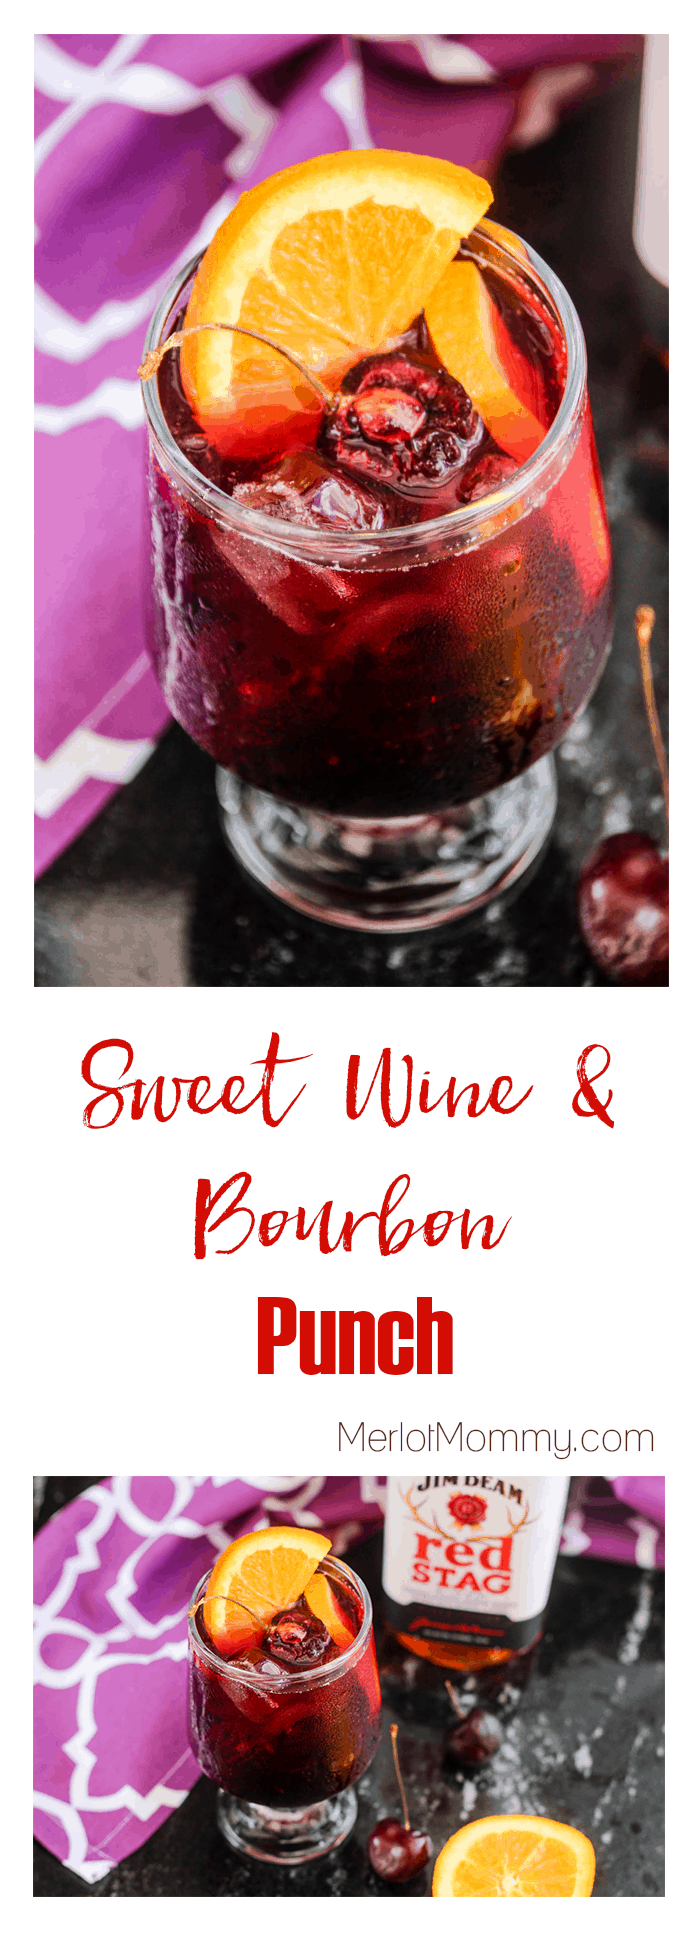 Sweet Wine and Bourbon Punch